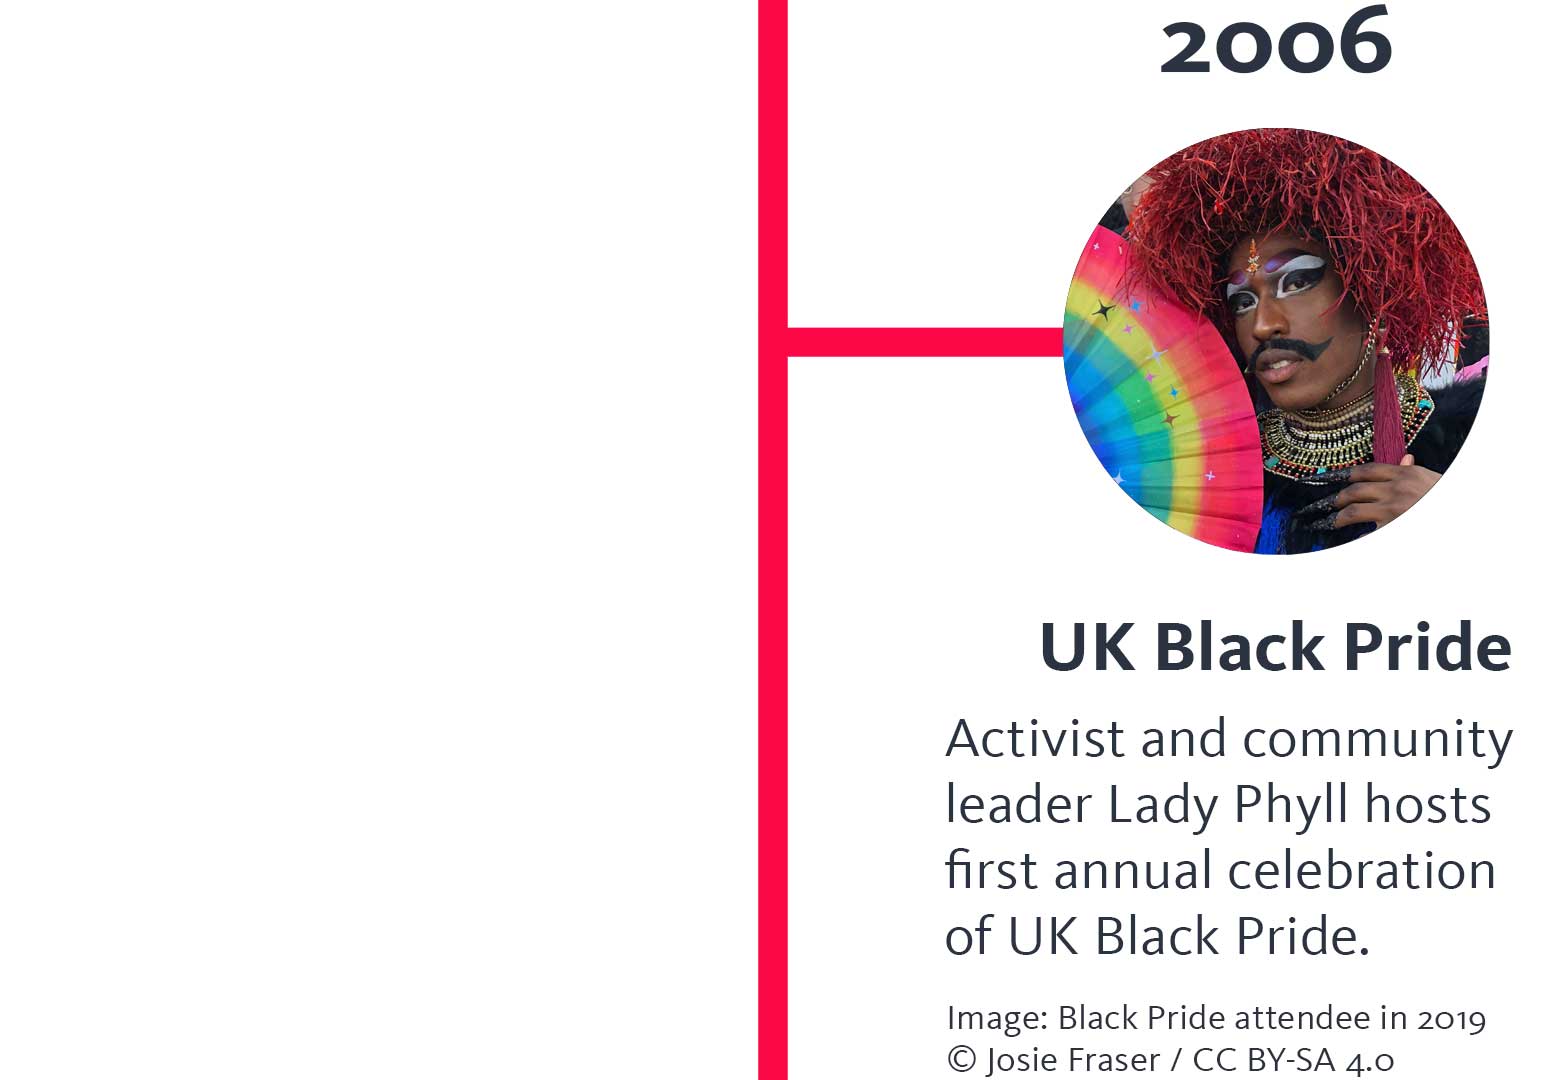 The year '2006' appears above a photo of a Black Pride attendee wearing elaborate jewellery and holding a rainbow fan. A heading below says 'UK Black Pride', and text below that says 'Activist and community leader Lady Phyll hosts first annual celebration of UK Black Pride.' and below that, 'Image: Black Pride attendee in 2019 © Josie Fraser / CC BY-SA 4.0'.